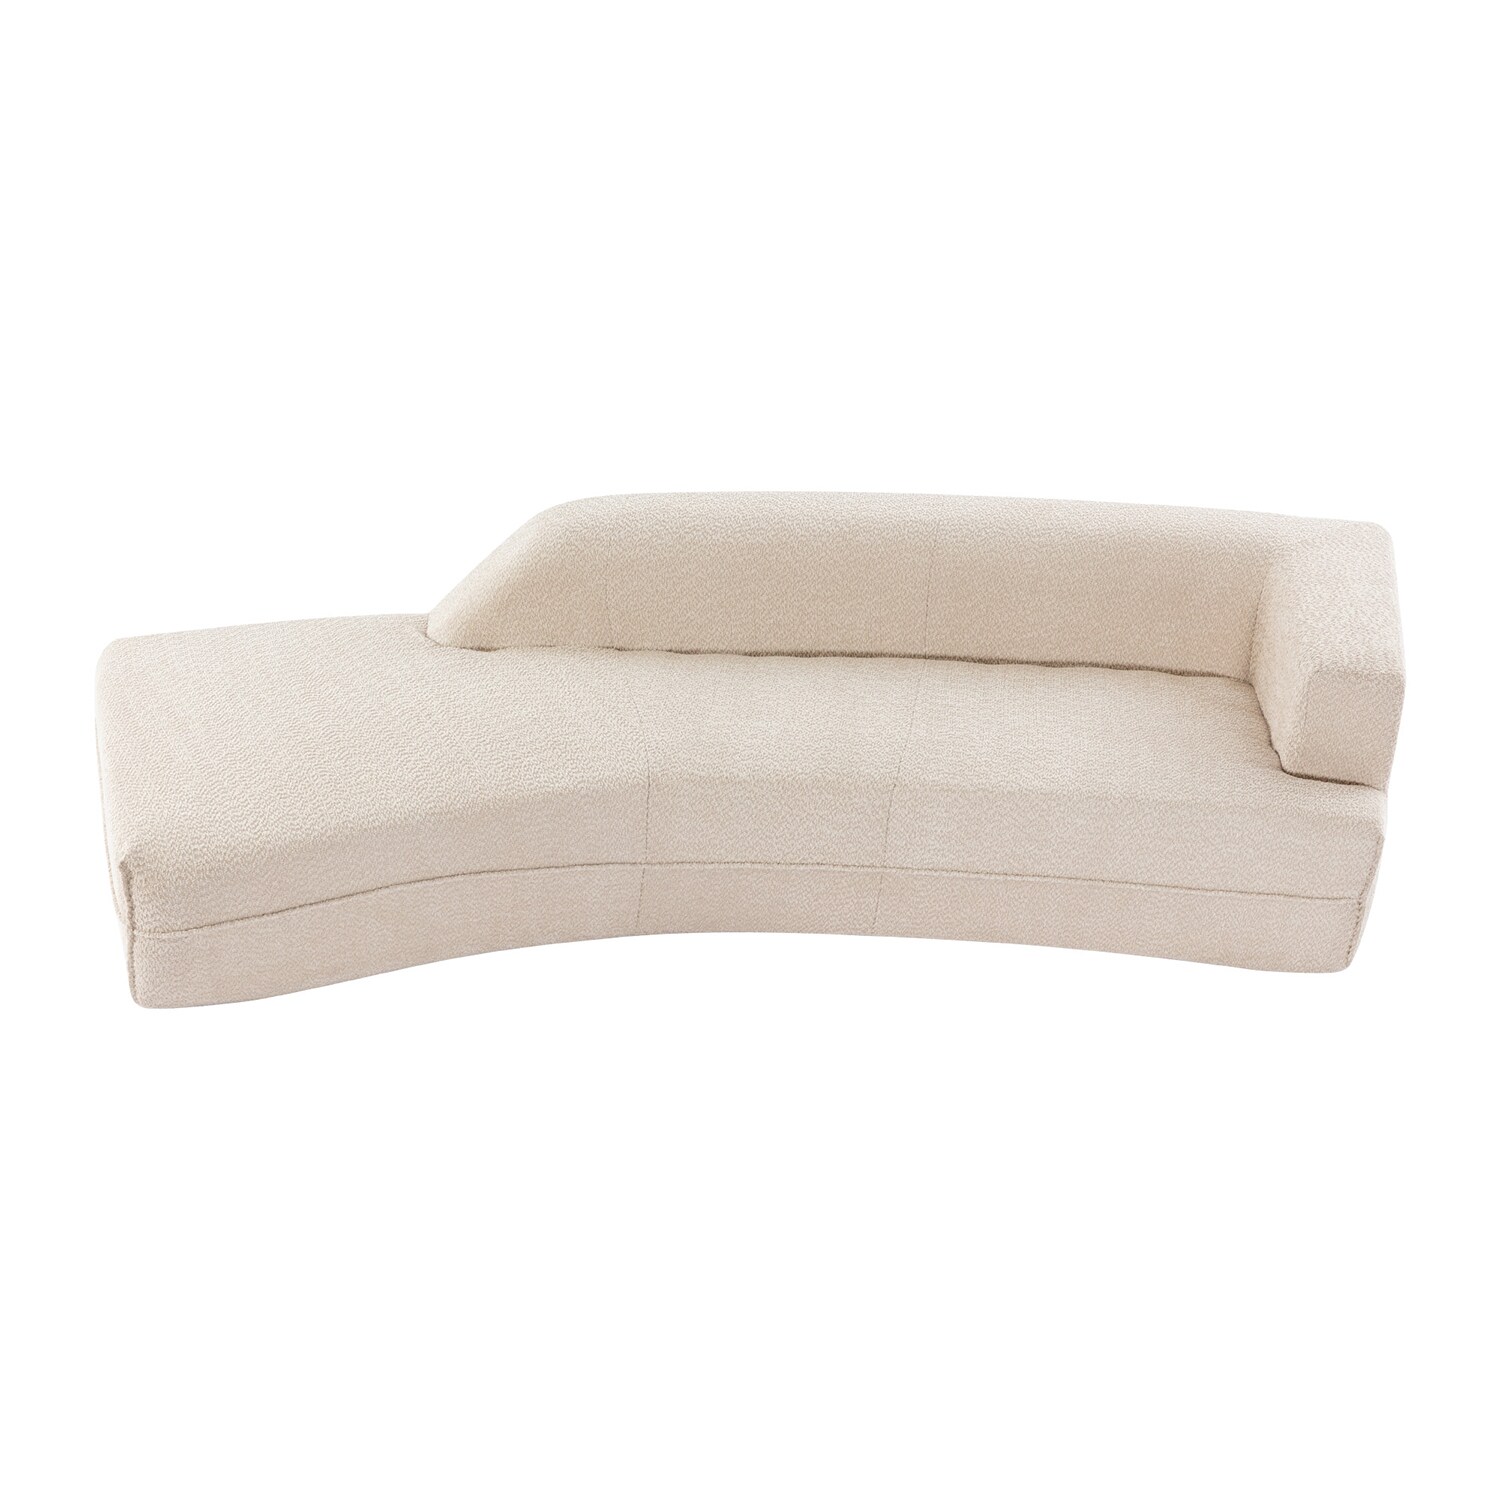 SINOFURN Modern Beige Boucle Chaise Lounge in the Chaise Lounges ...